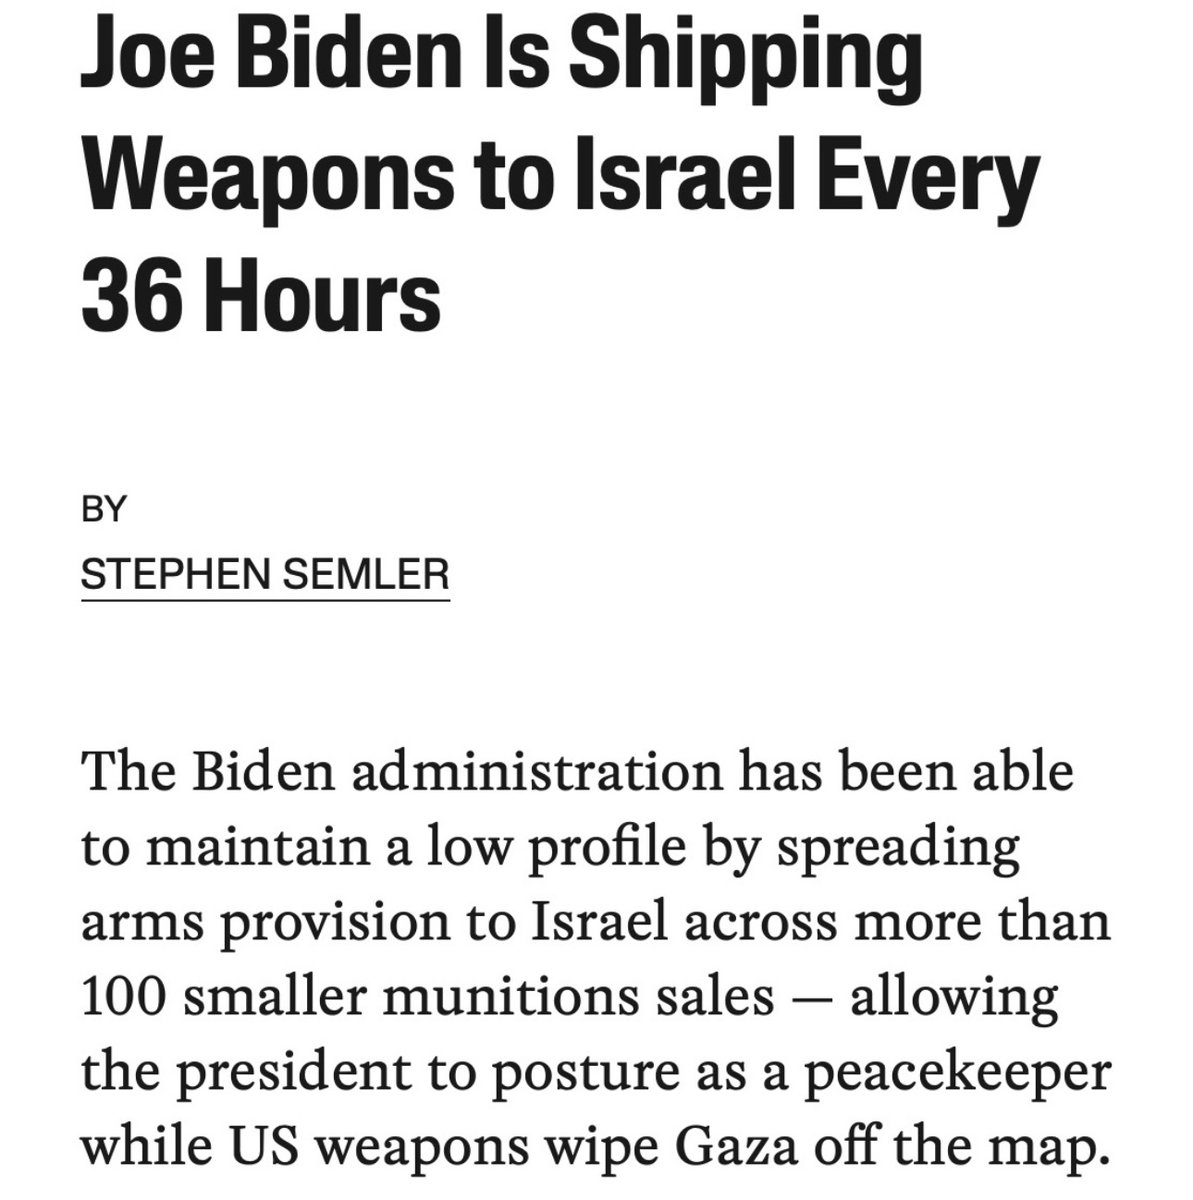 JOE BIDEN IS SHIPPING WEAPONS TO ISRAEL EVERY 36 HOURS